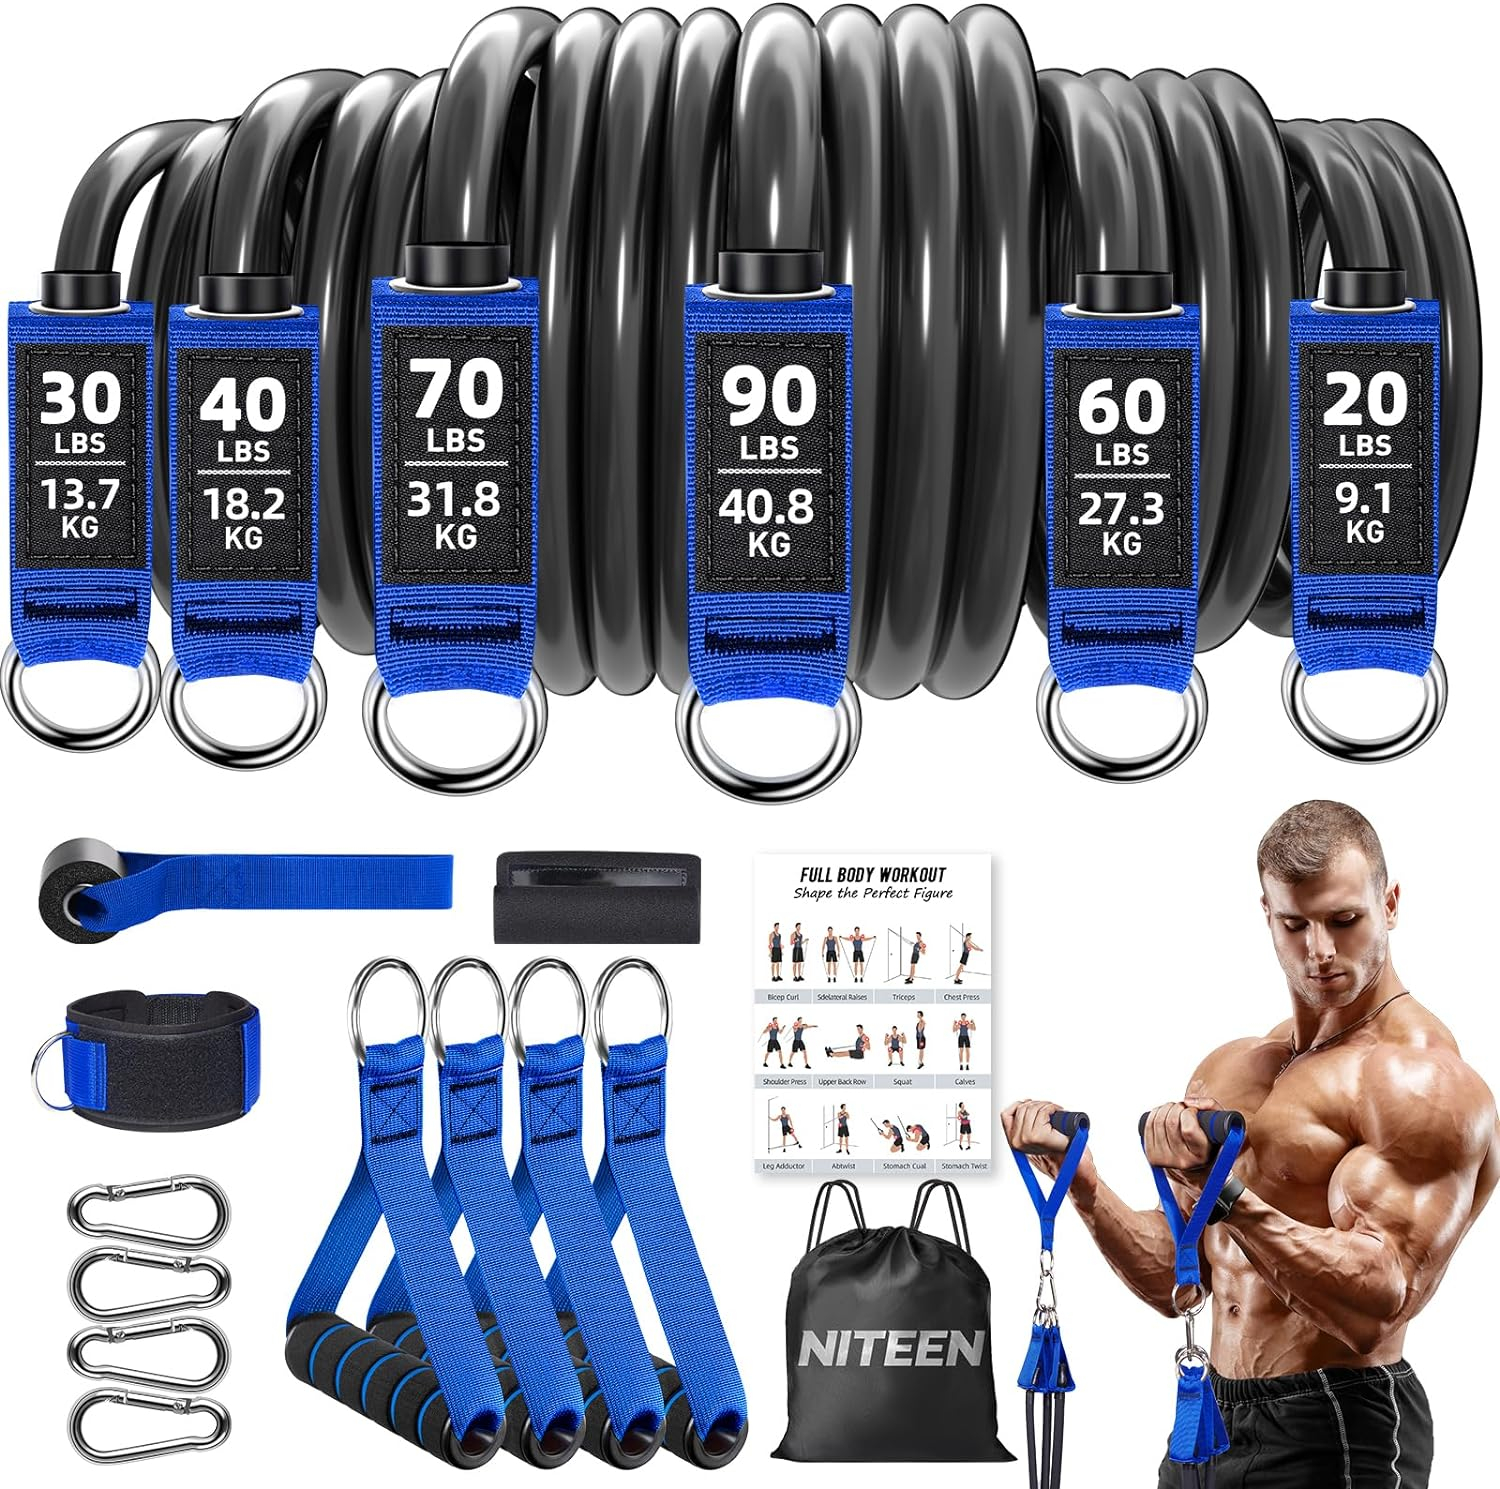 NITEEN Heavy Duty Resistance Bands Set for Home Workout Effective Exercise Bands for Strength Training, Physical Therapy,Resistance Bands with Handles, Door Anchor, Legs Ankle Straps